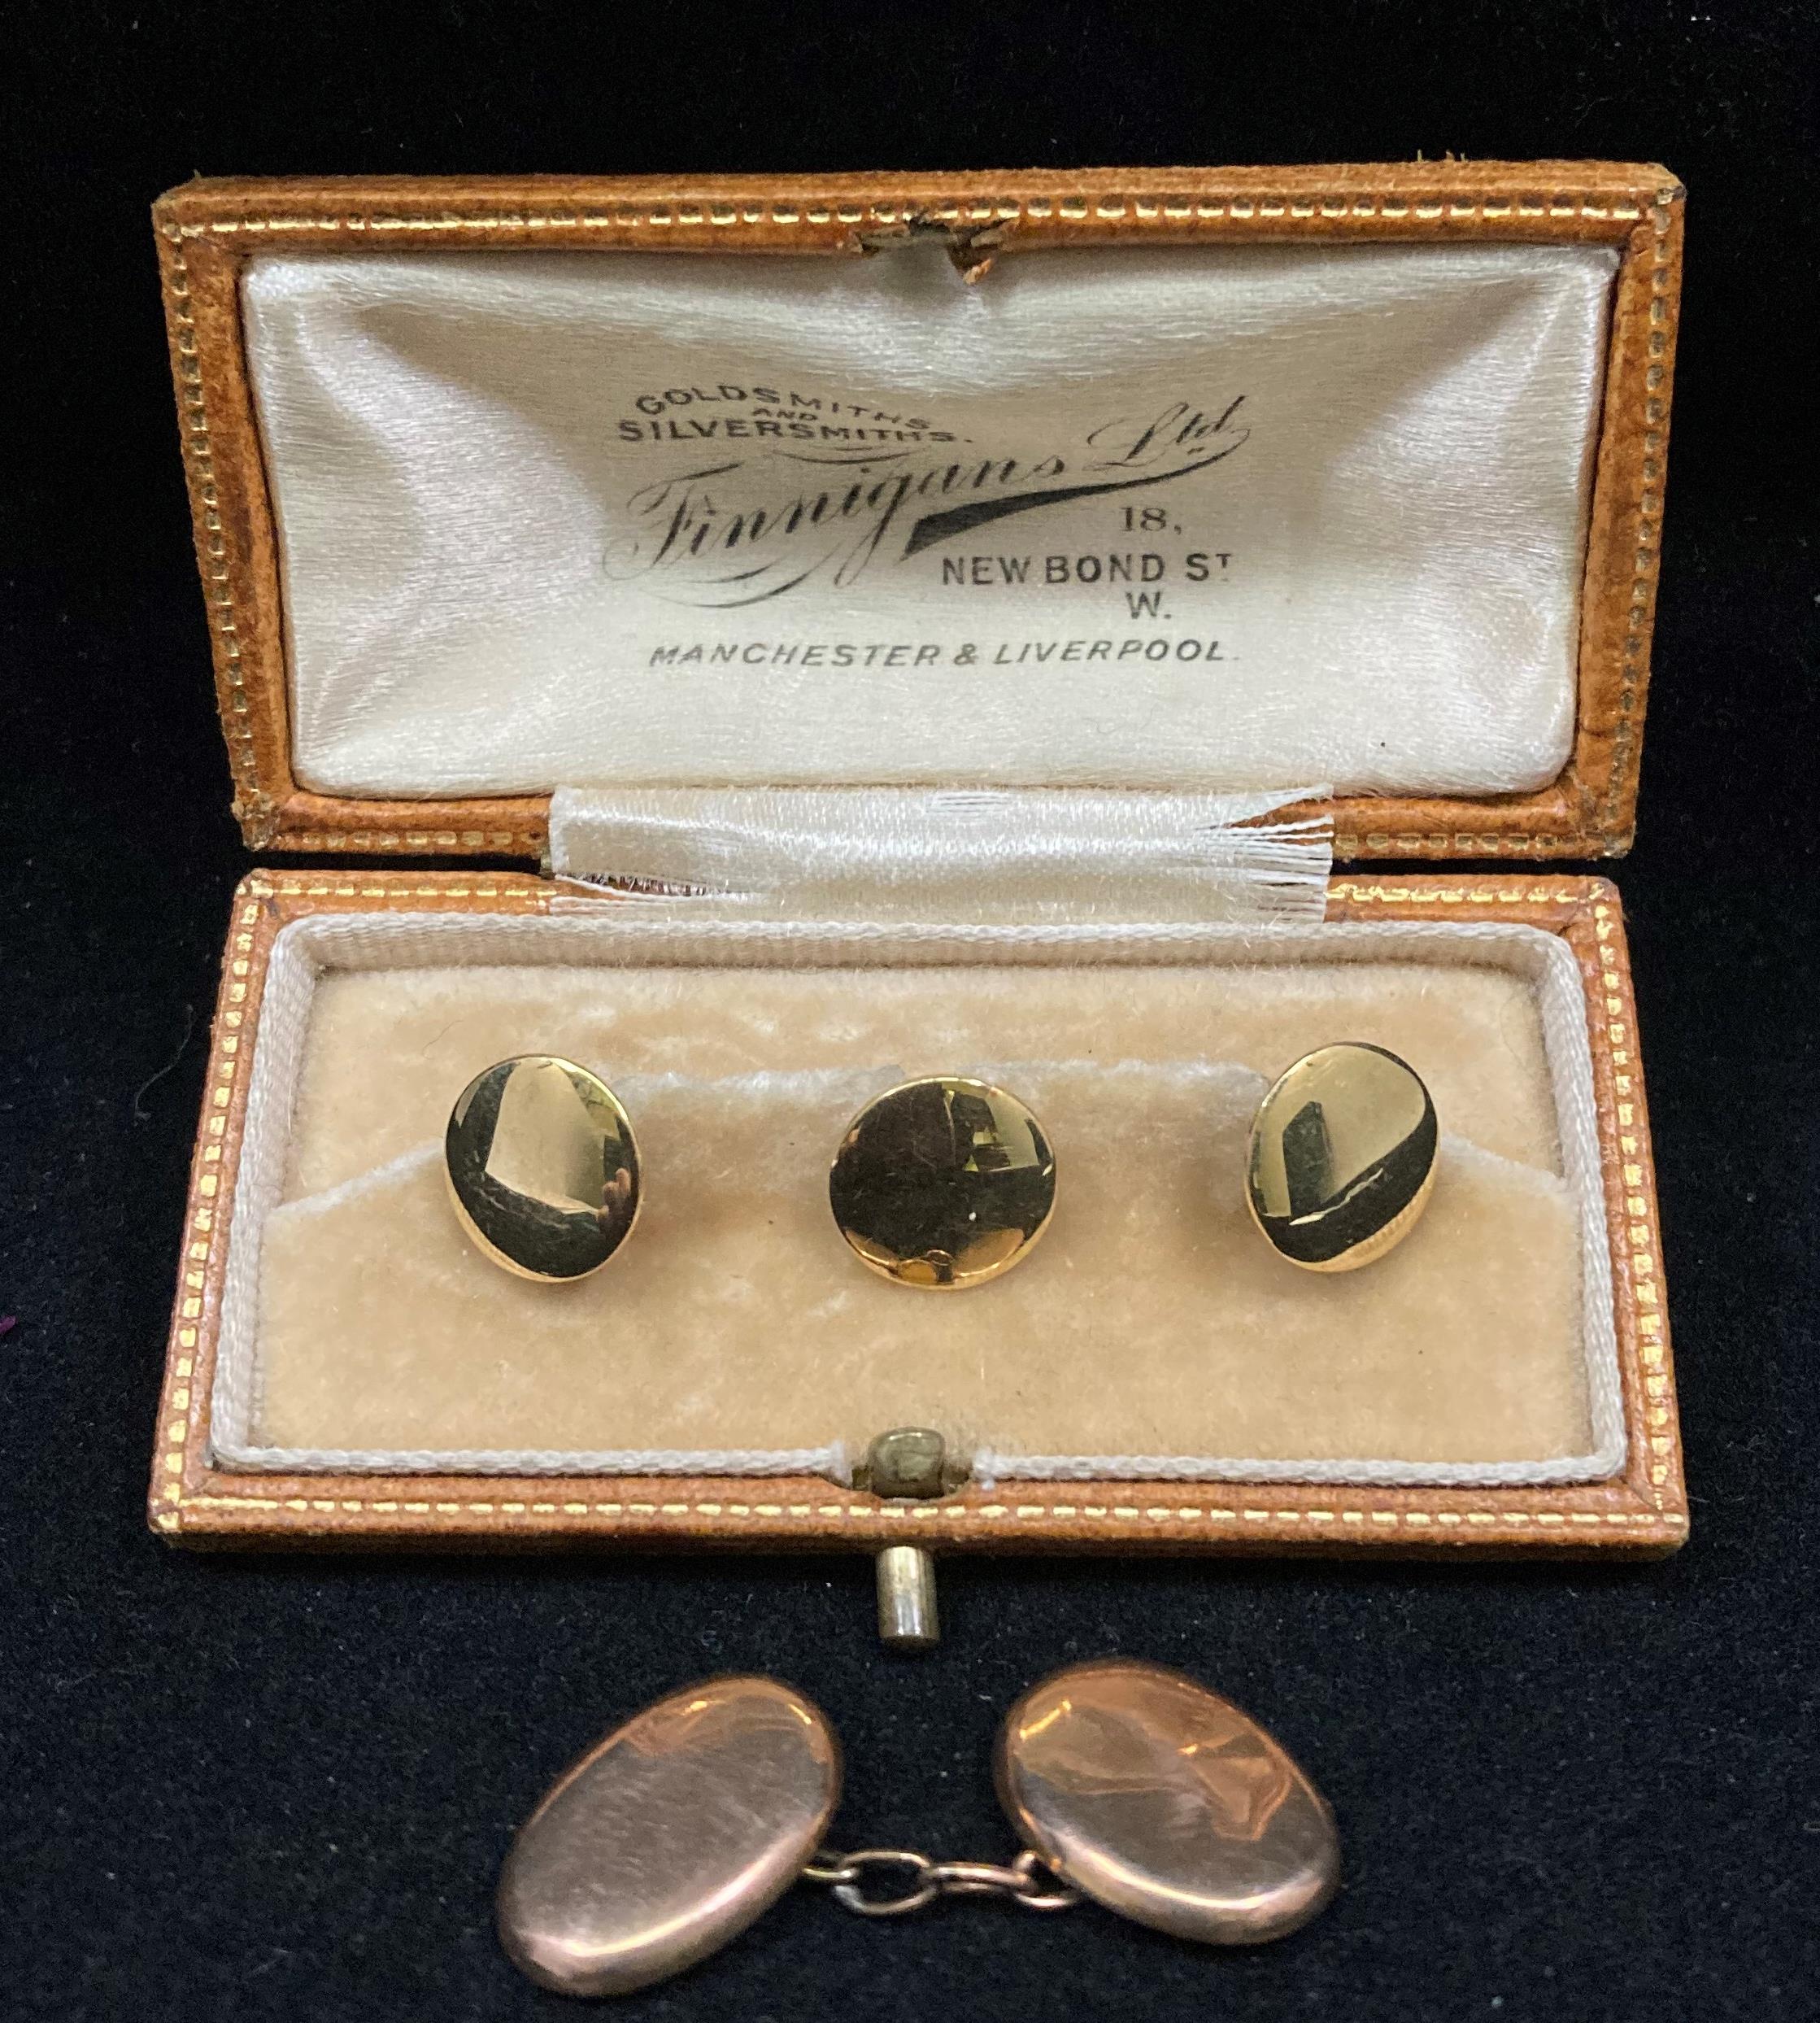 Set of three 18ct gold button/shirt studs in fitted case by Finnigans Ltd (approximately weight 3.